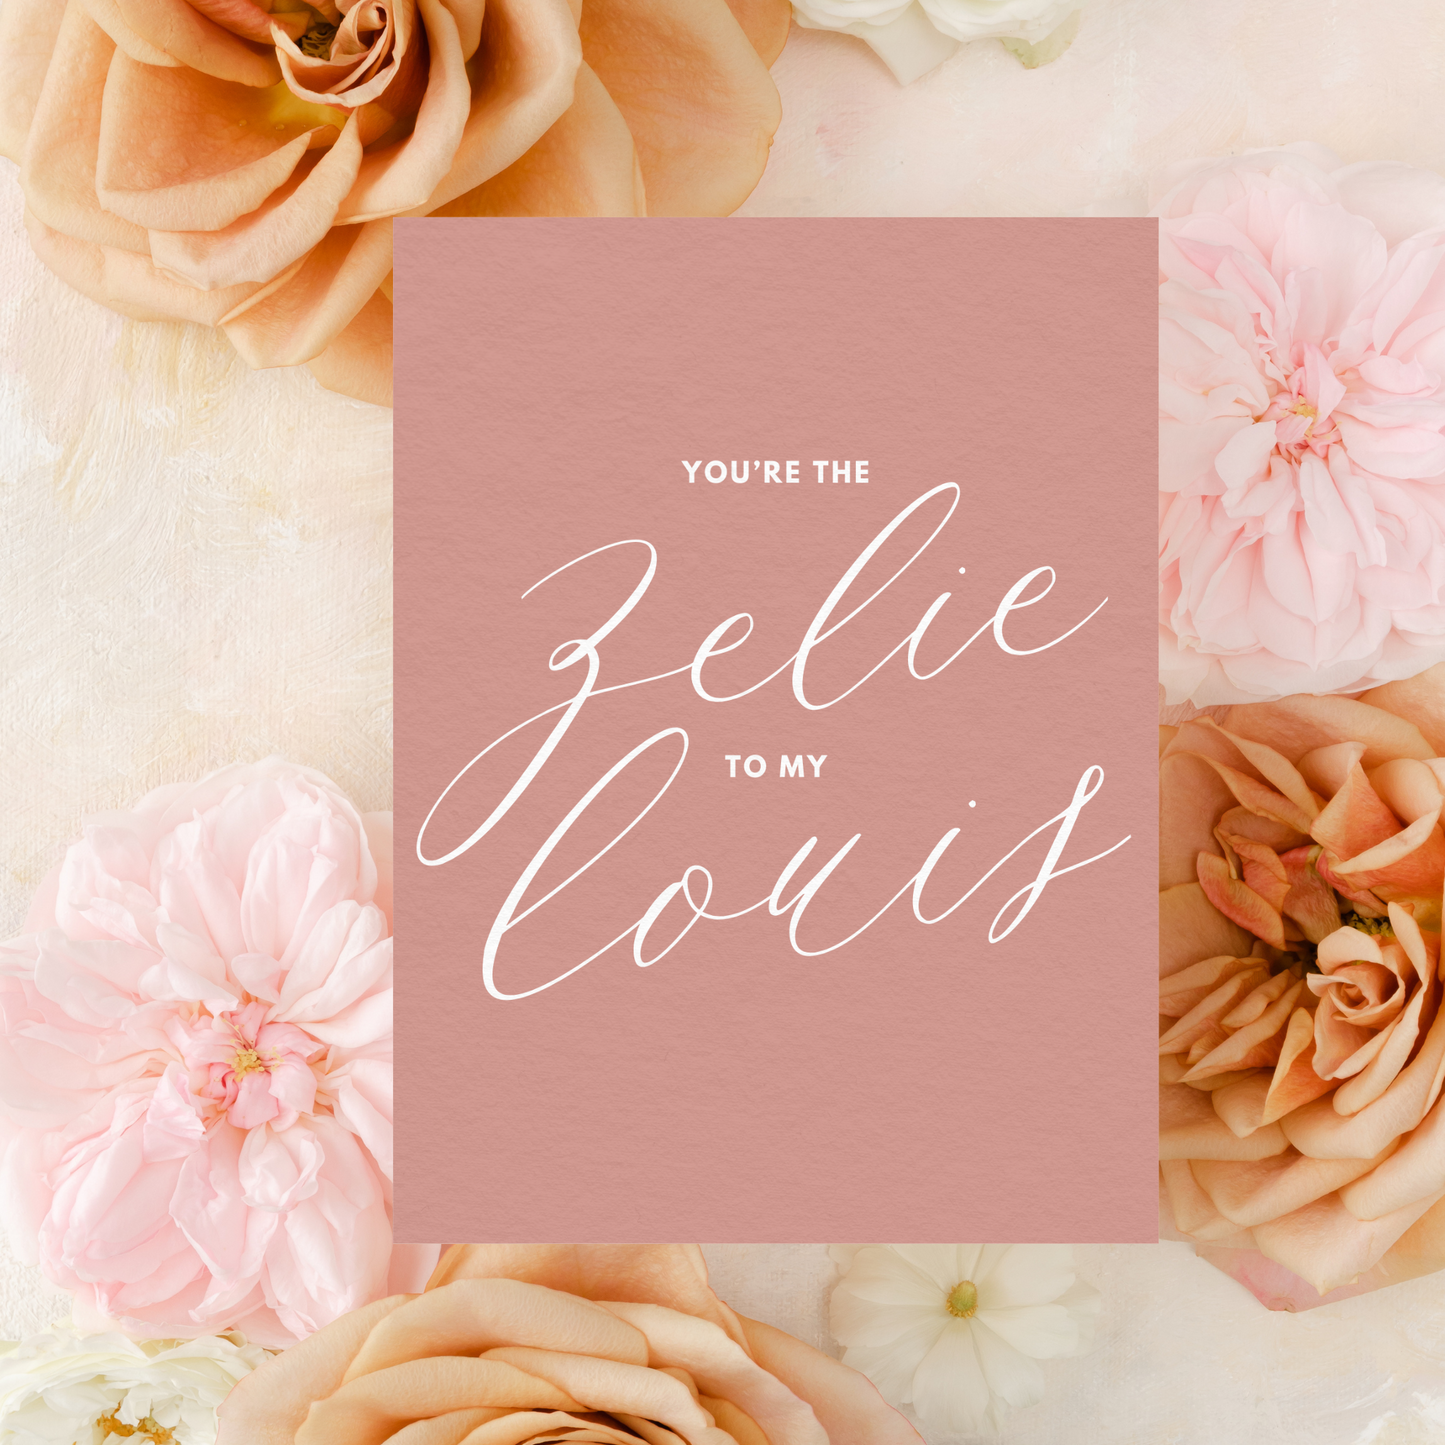 Catholic Valentine's Day Greeting Card, "You're the Zelie to my Louis"